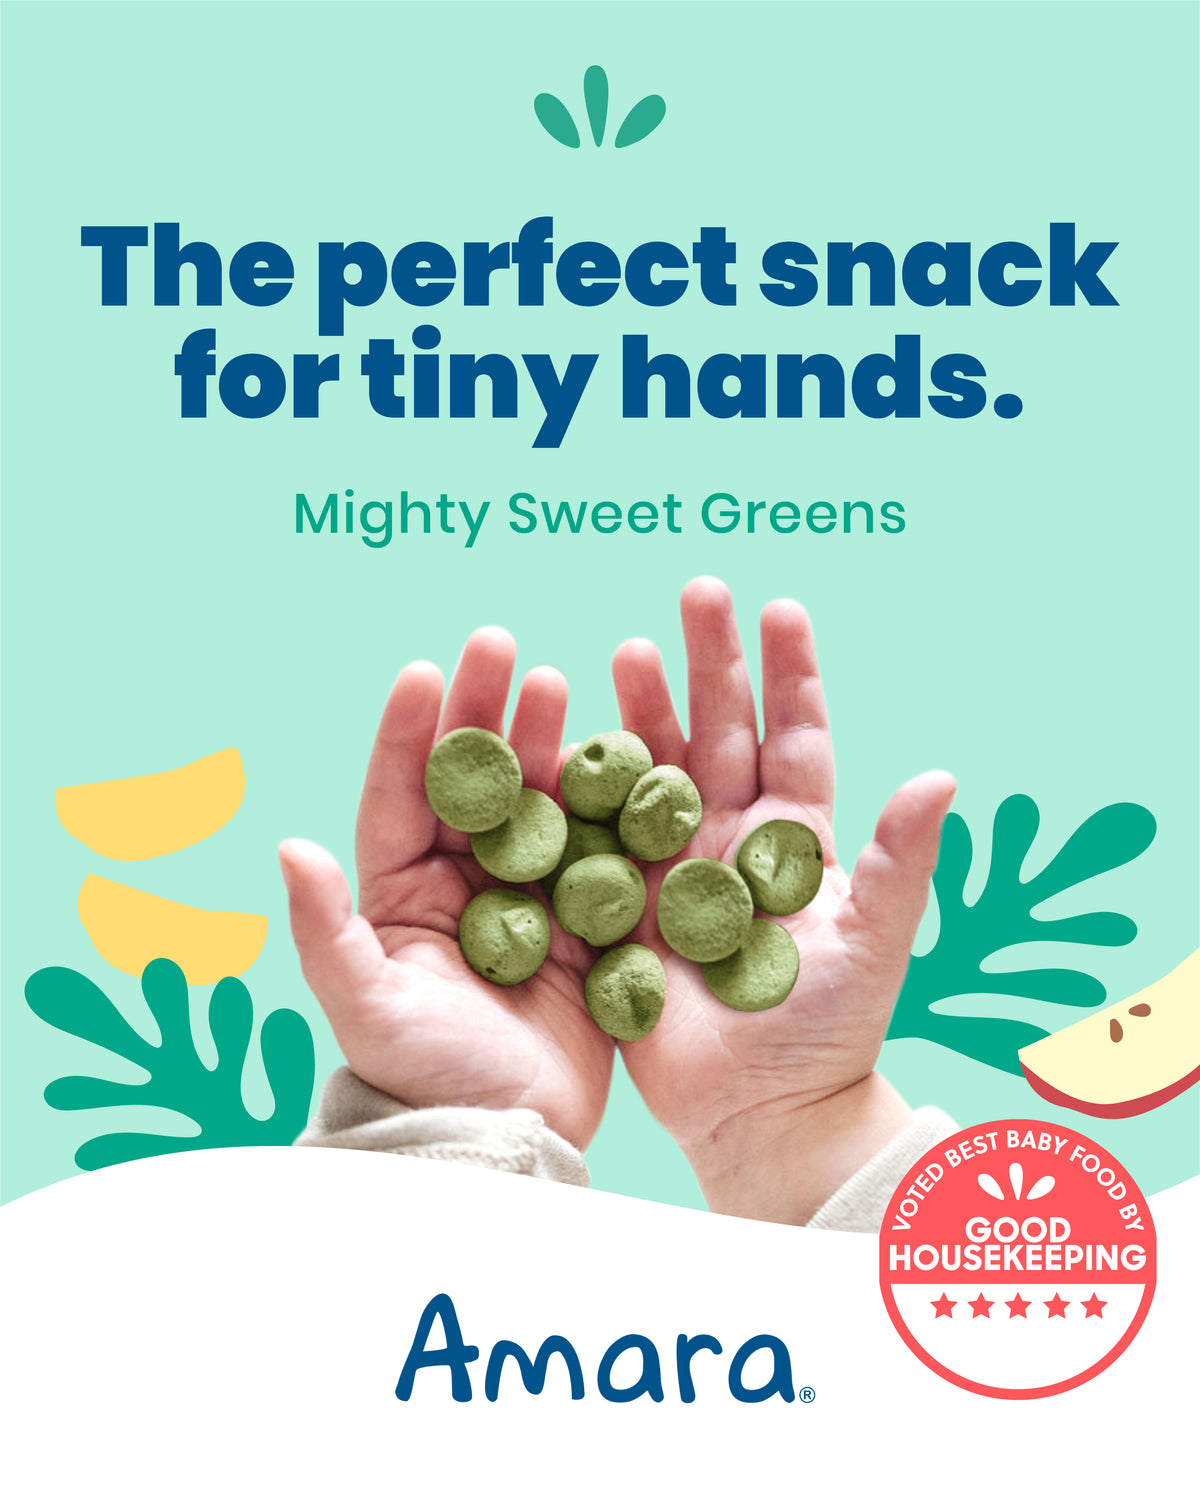 Mighty Sweet Greens